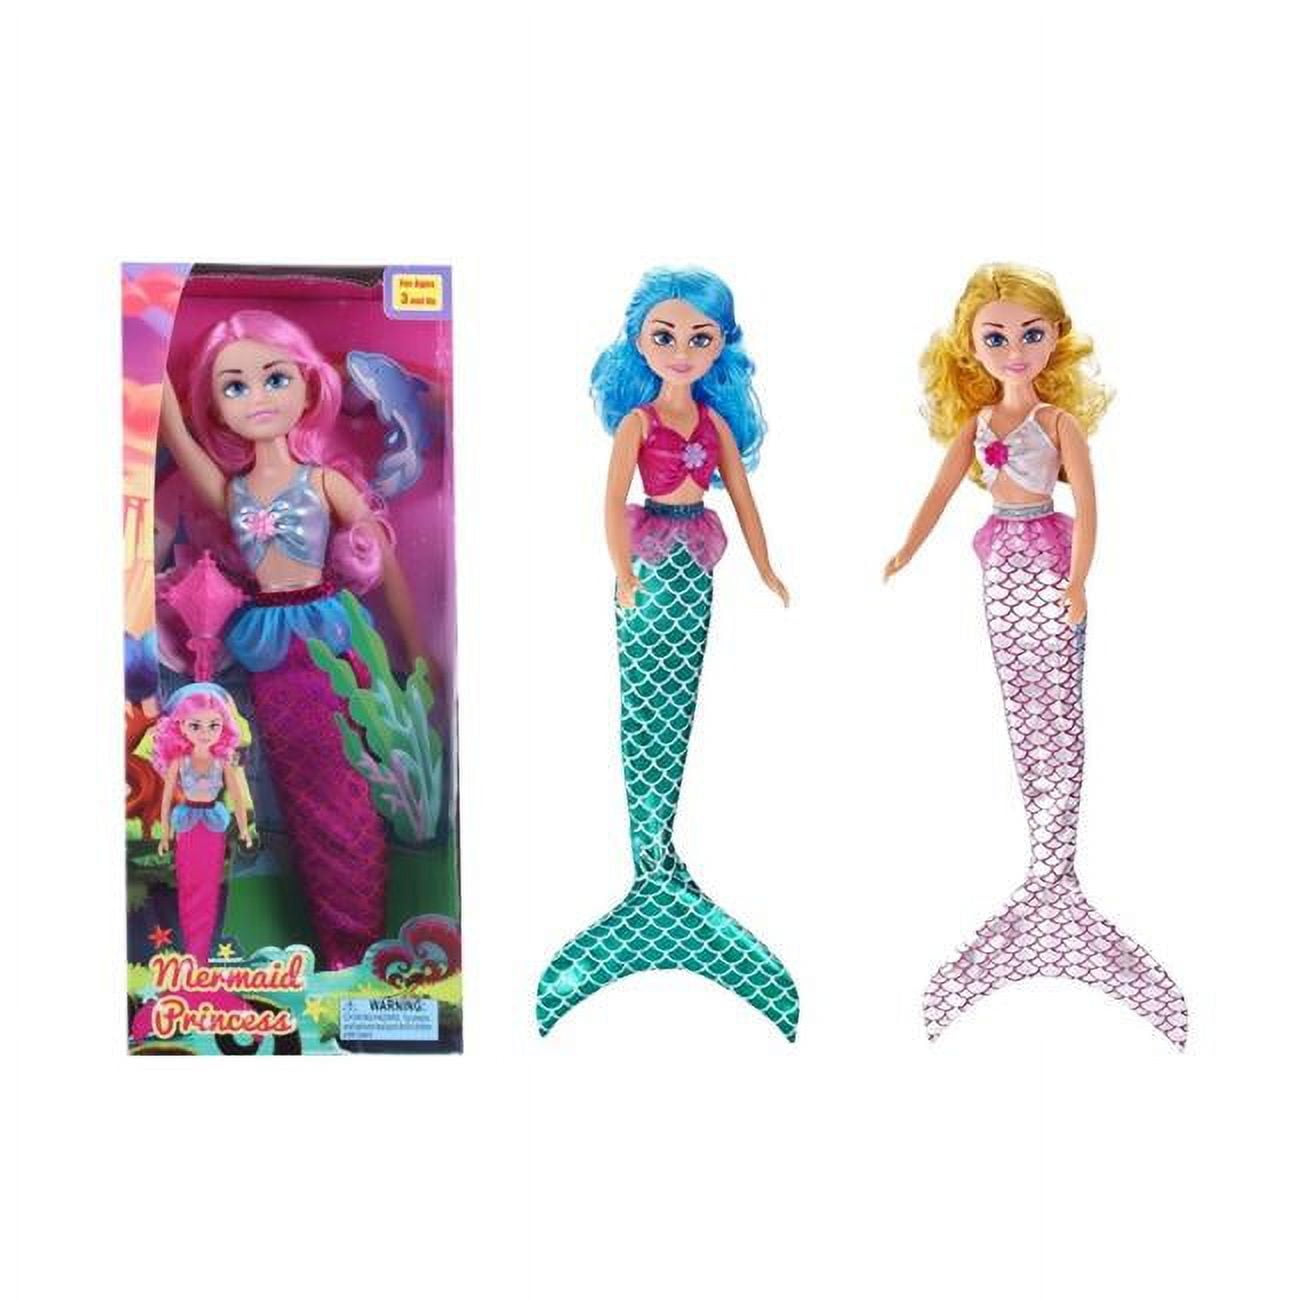 Picture of DDI 2339846 Princess Mermaid Fashion Doll - Assorted Case of 18